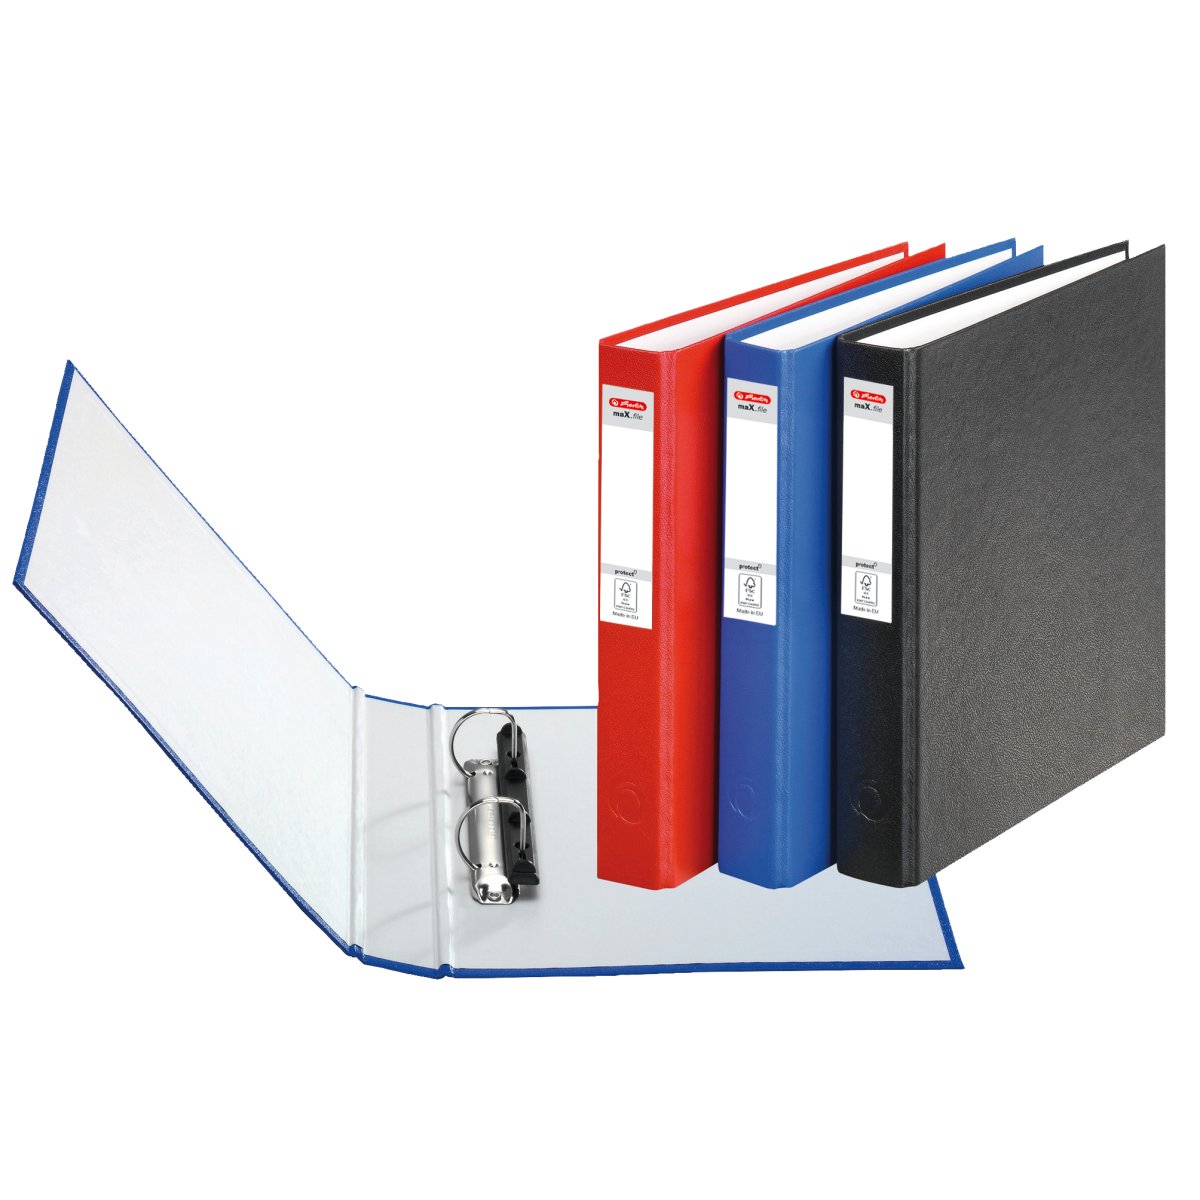 Amazon.com : Lever Arch 2-Ring Binder; U.S. Letter Size; for 2 3/4